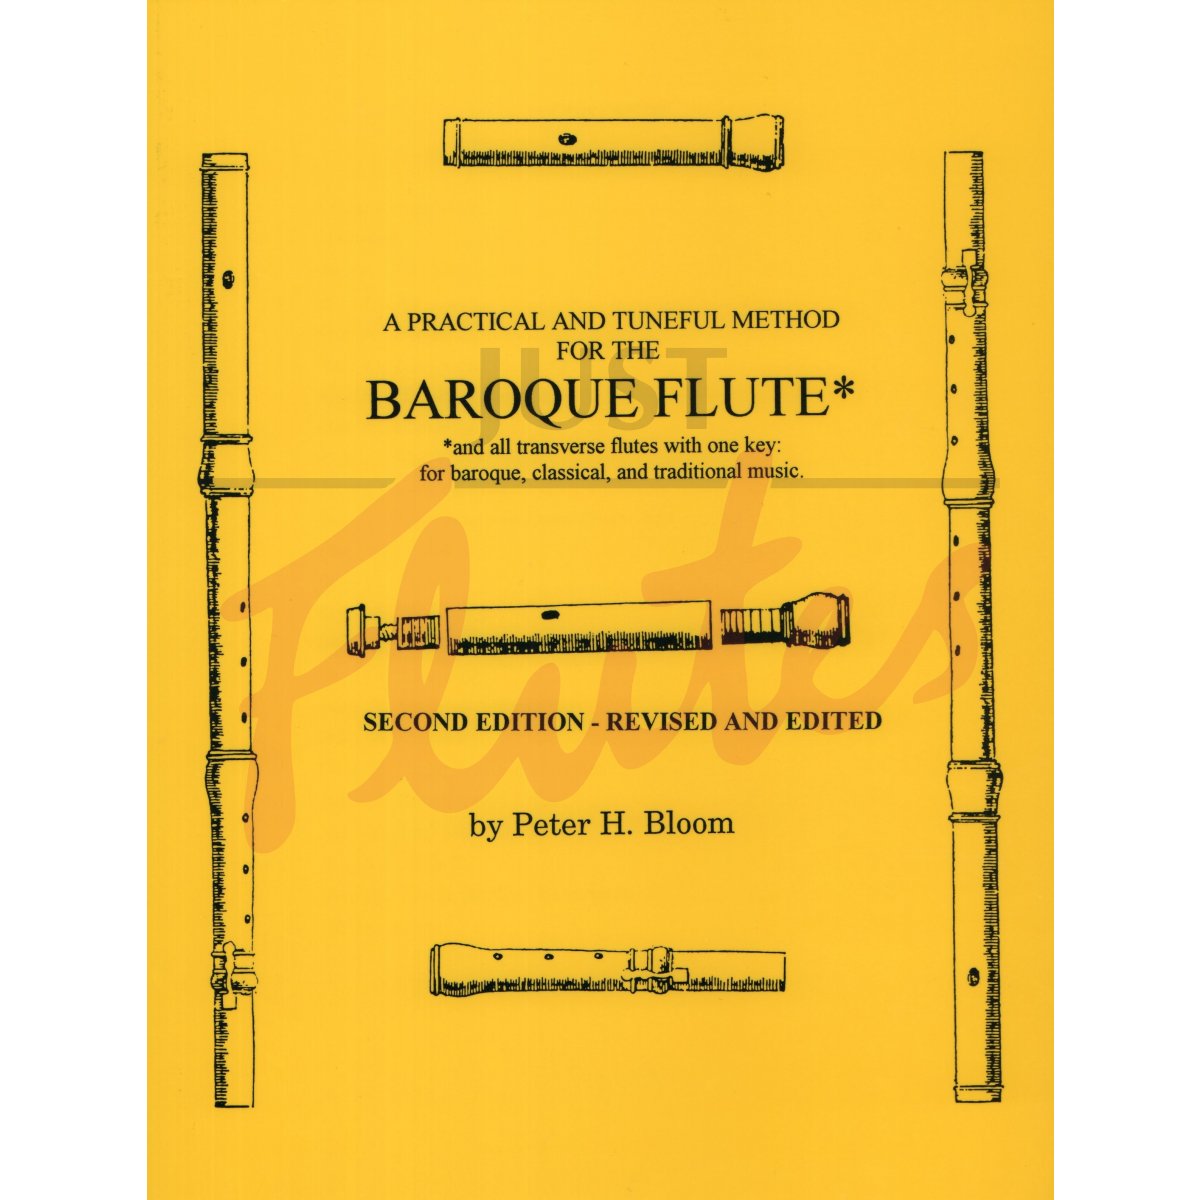 A Practical and Tuneful Method for the Baroque Flute